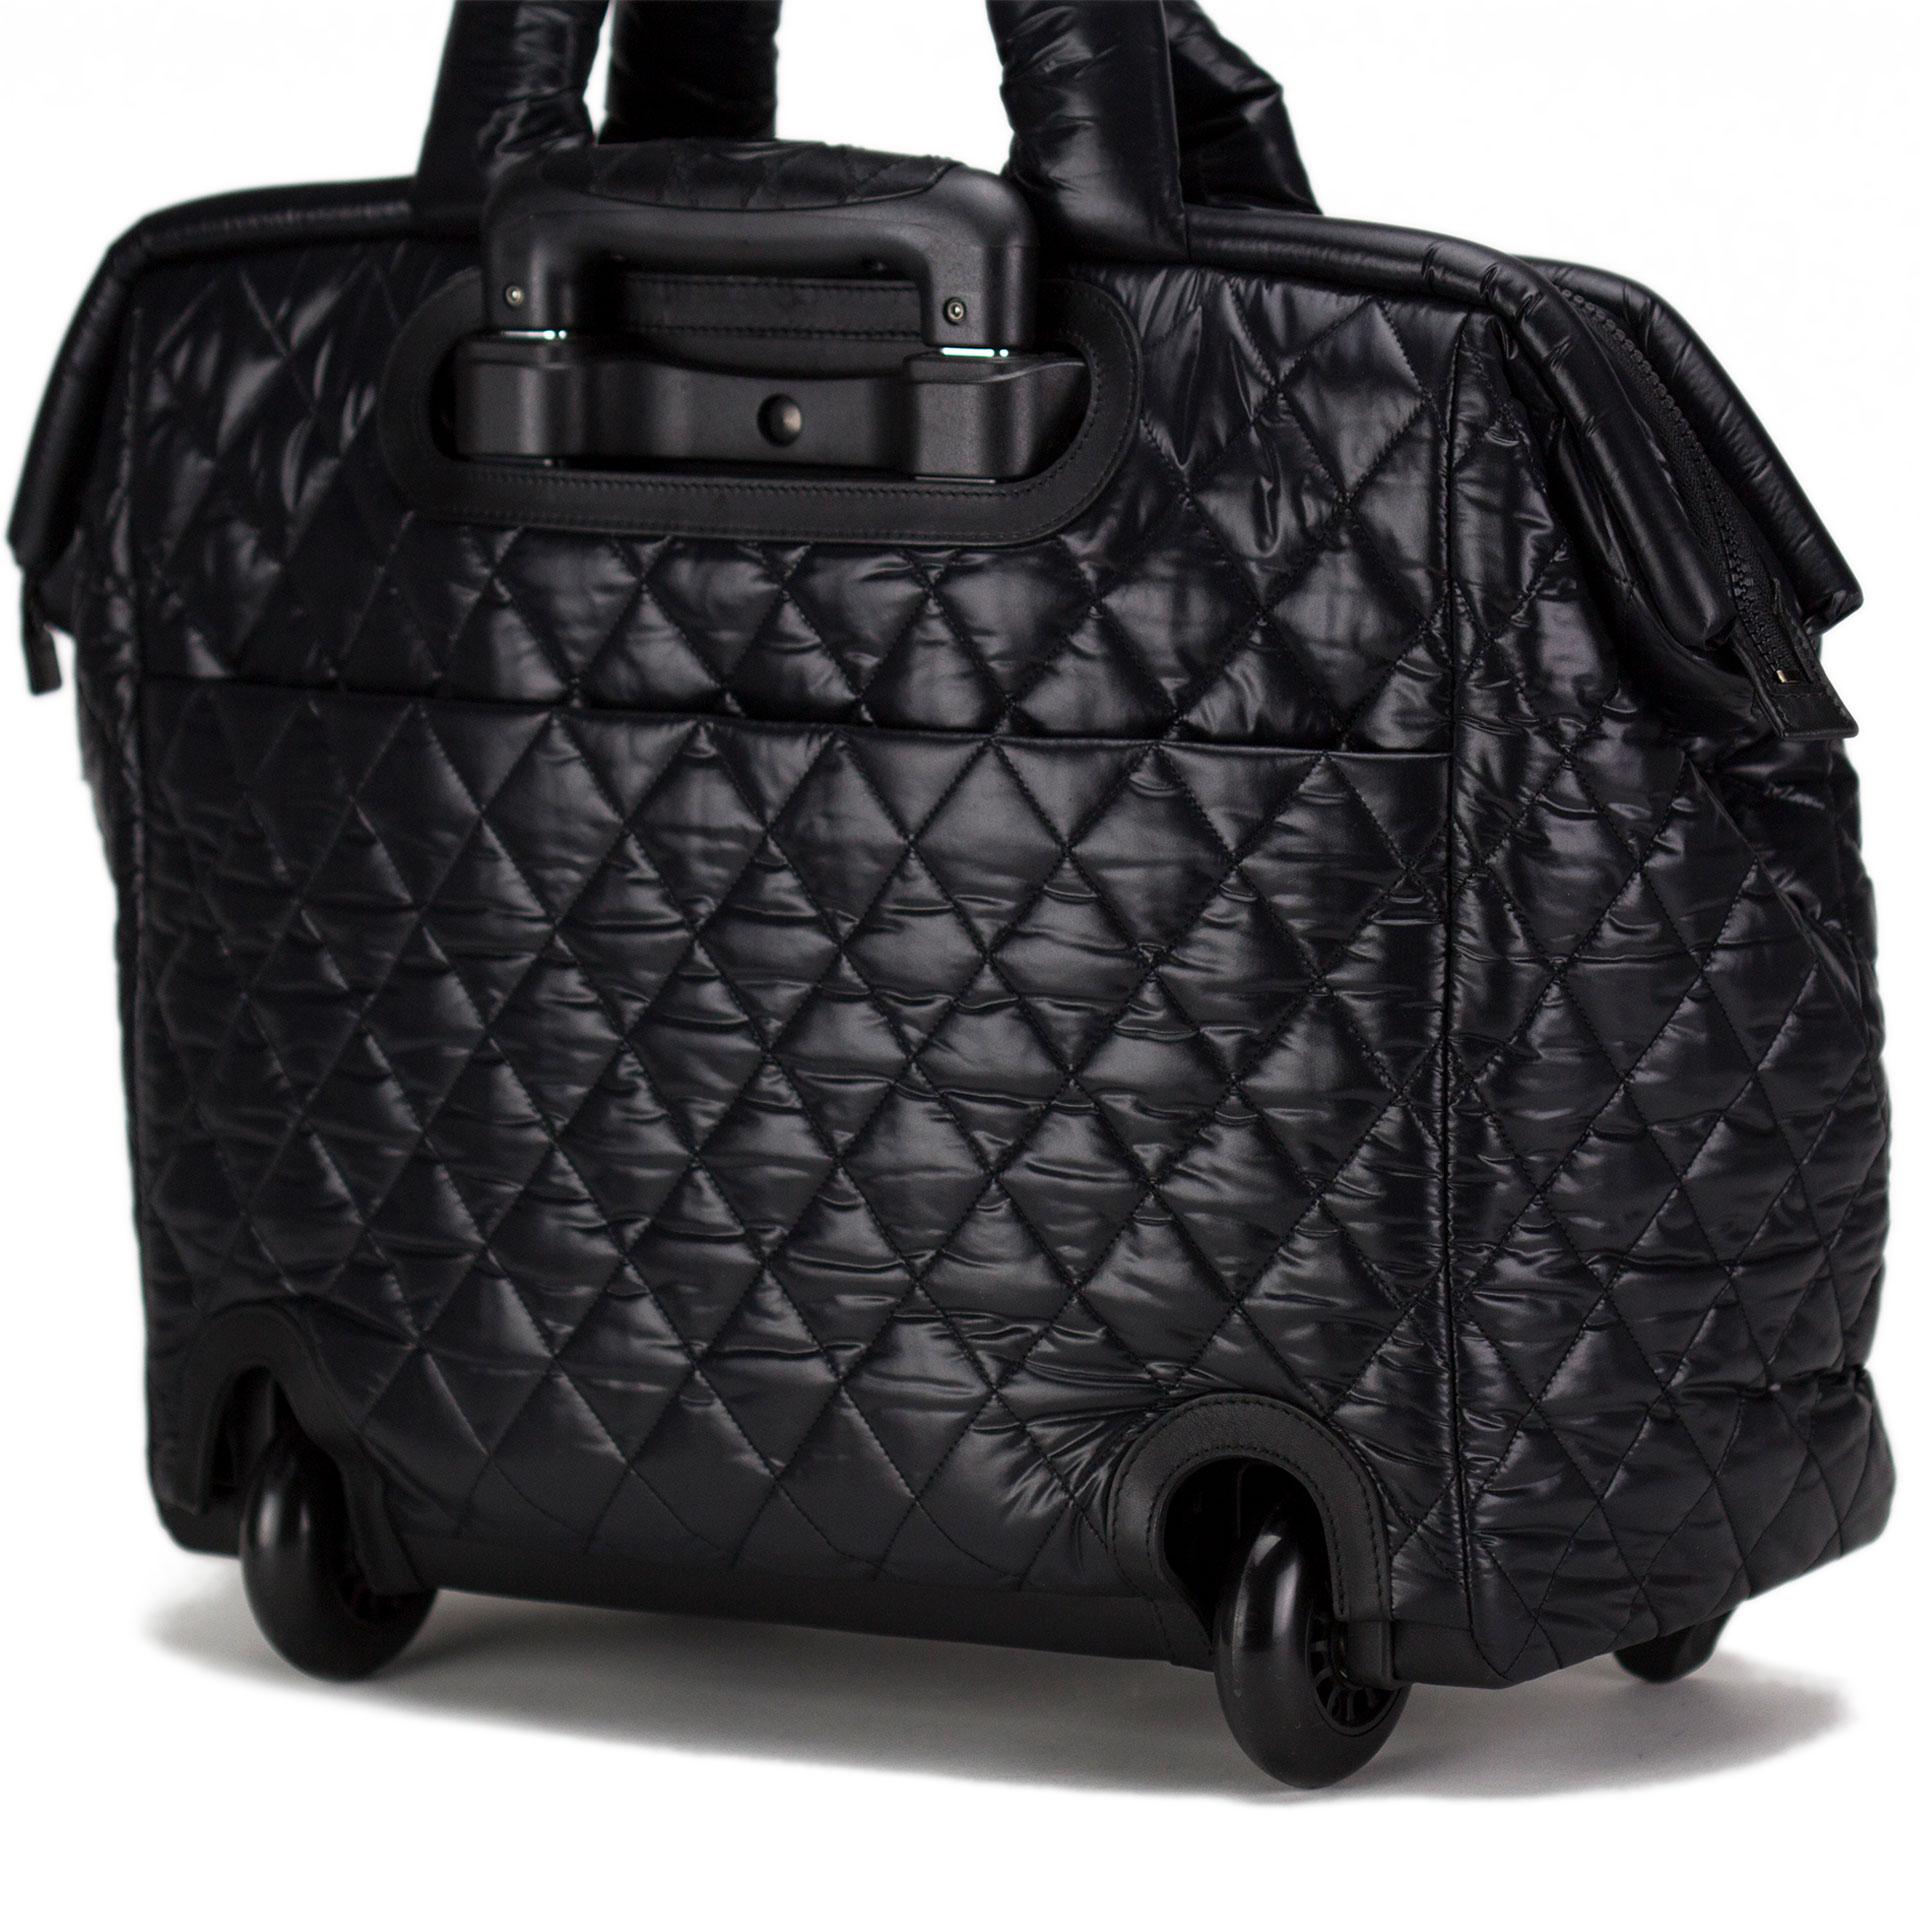 Chanel 2012 Coco Cocoon Quilted Case Carry On Trolley Travel Black Luggage Bag For Sale 1